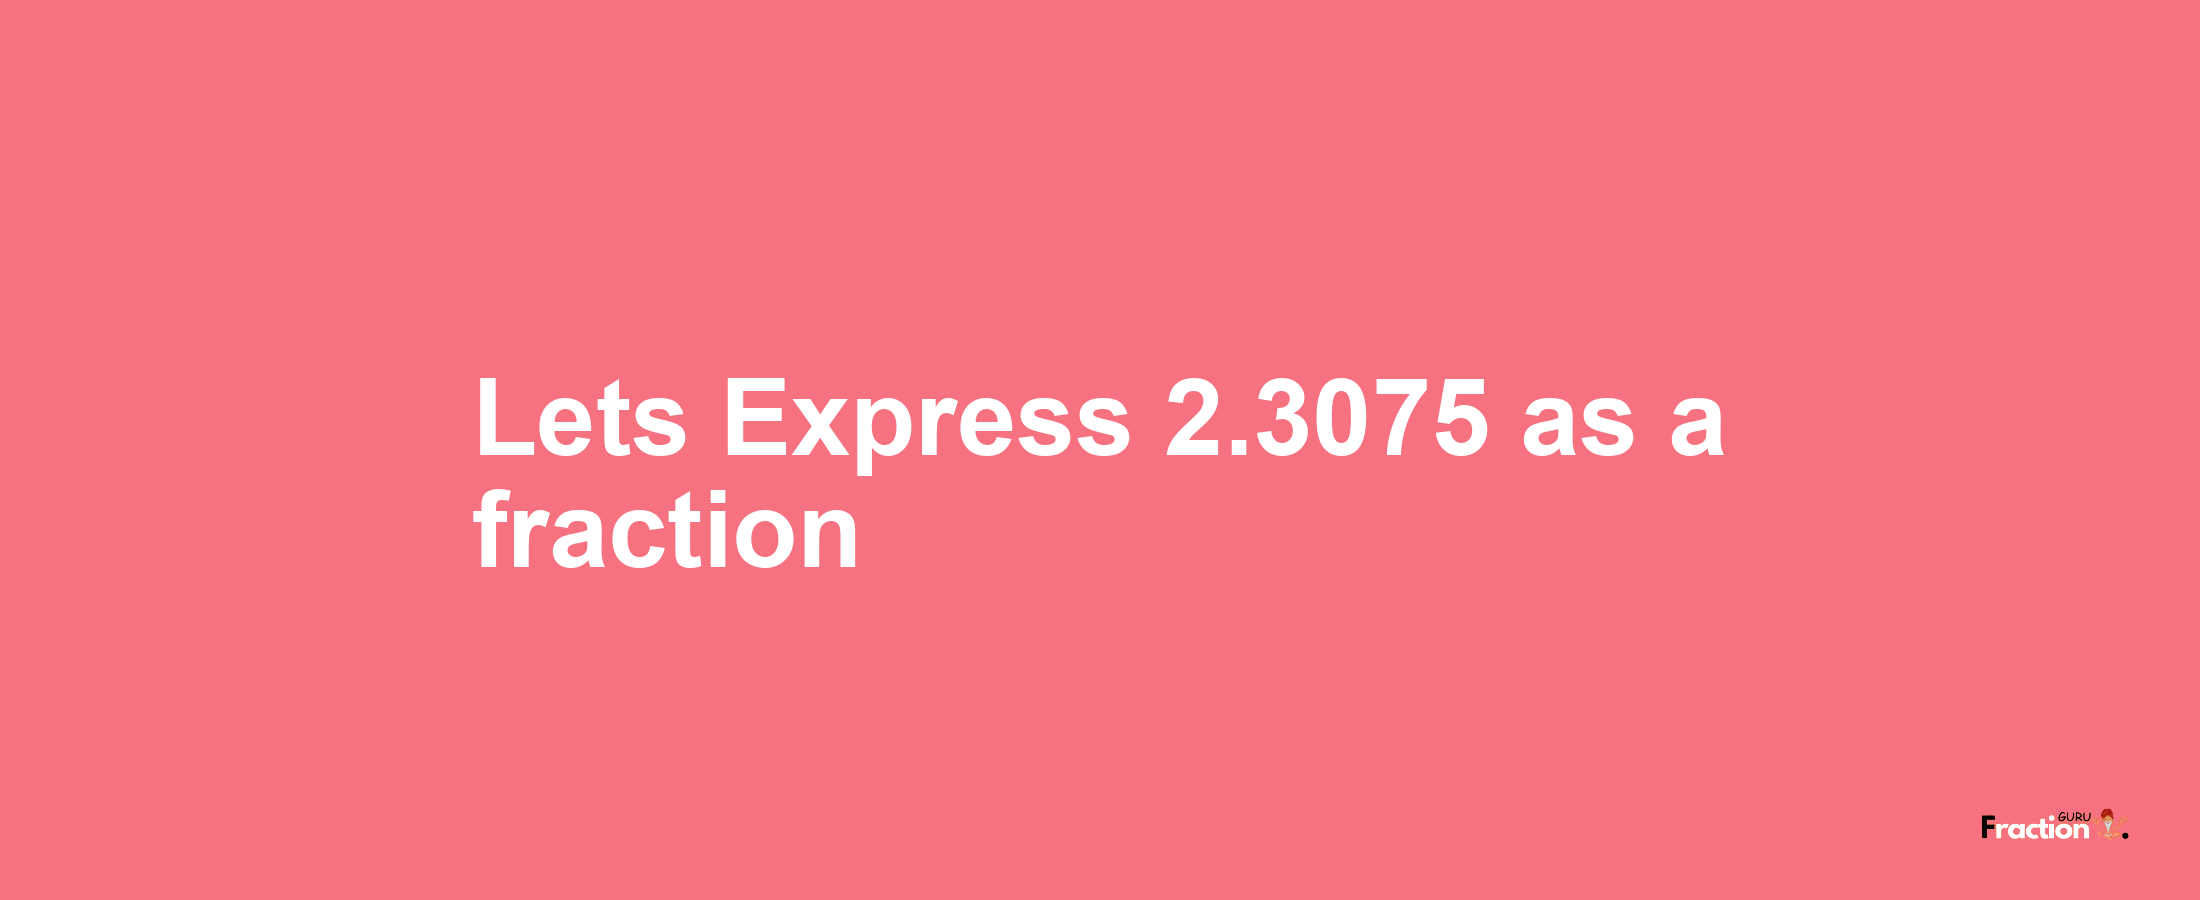 Lets Express 2.3075 as afraction